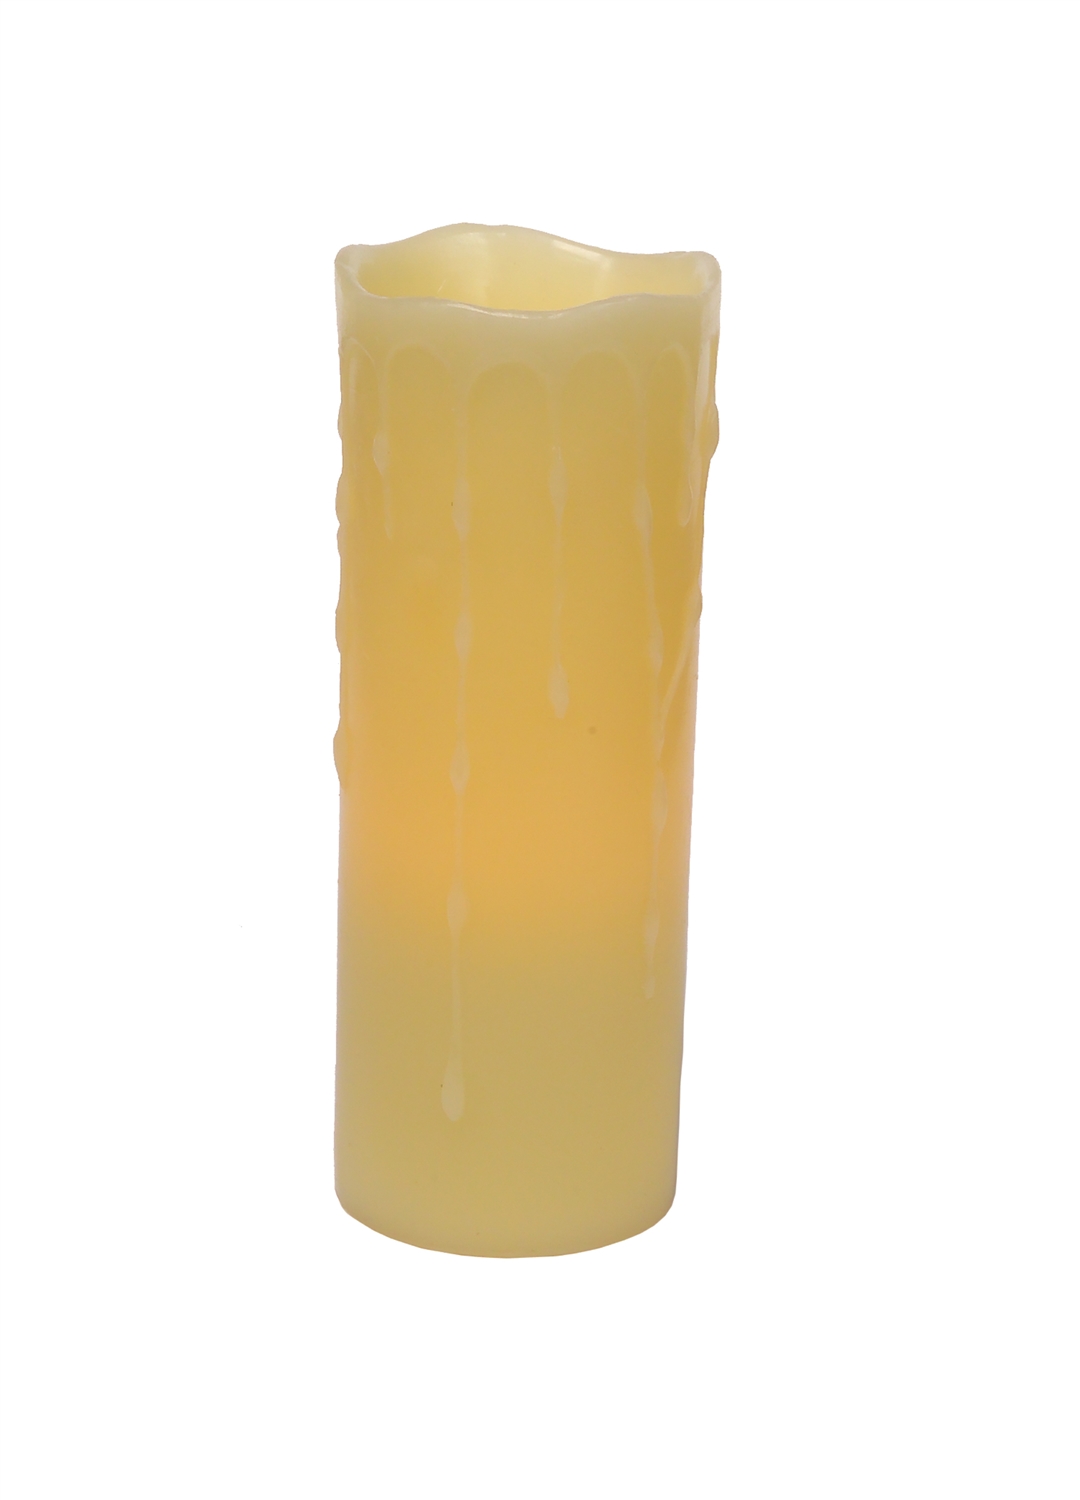 LED Wax Dripping Pillar Candle (Set of 3) 3"Dx8"H Wax/Plastic - 2 C Batteries Not Incld.